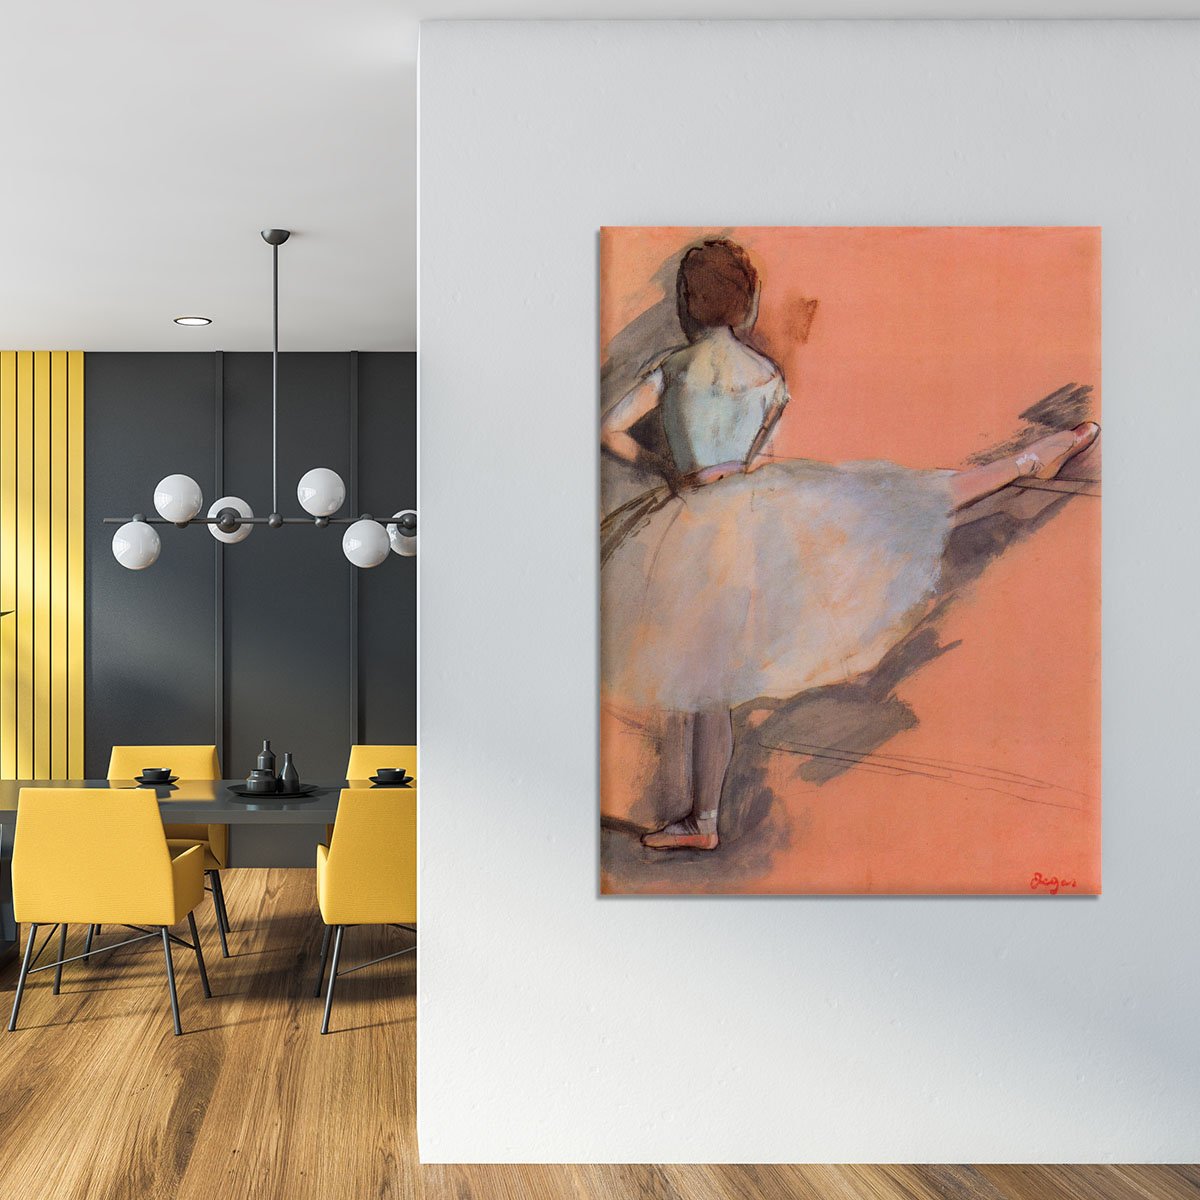 Dancer at the bar 1 by Degas Canvas Print or Poster